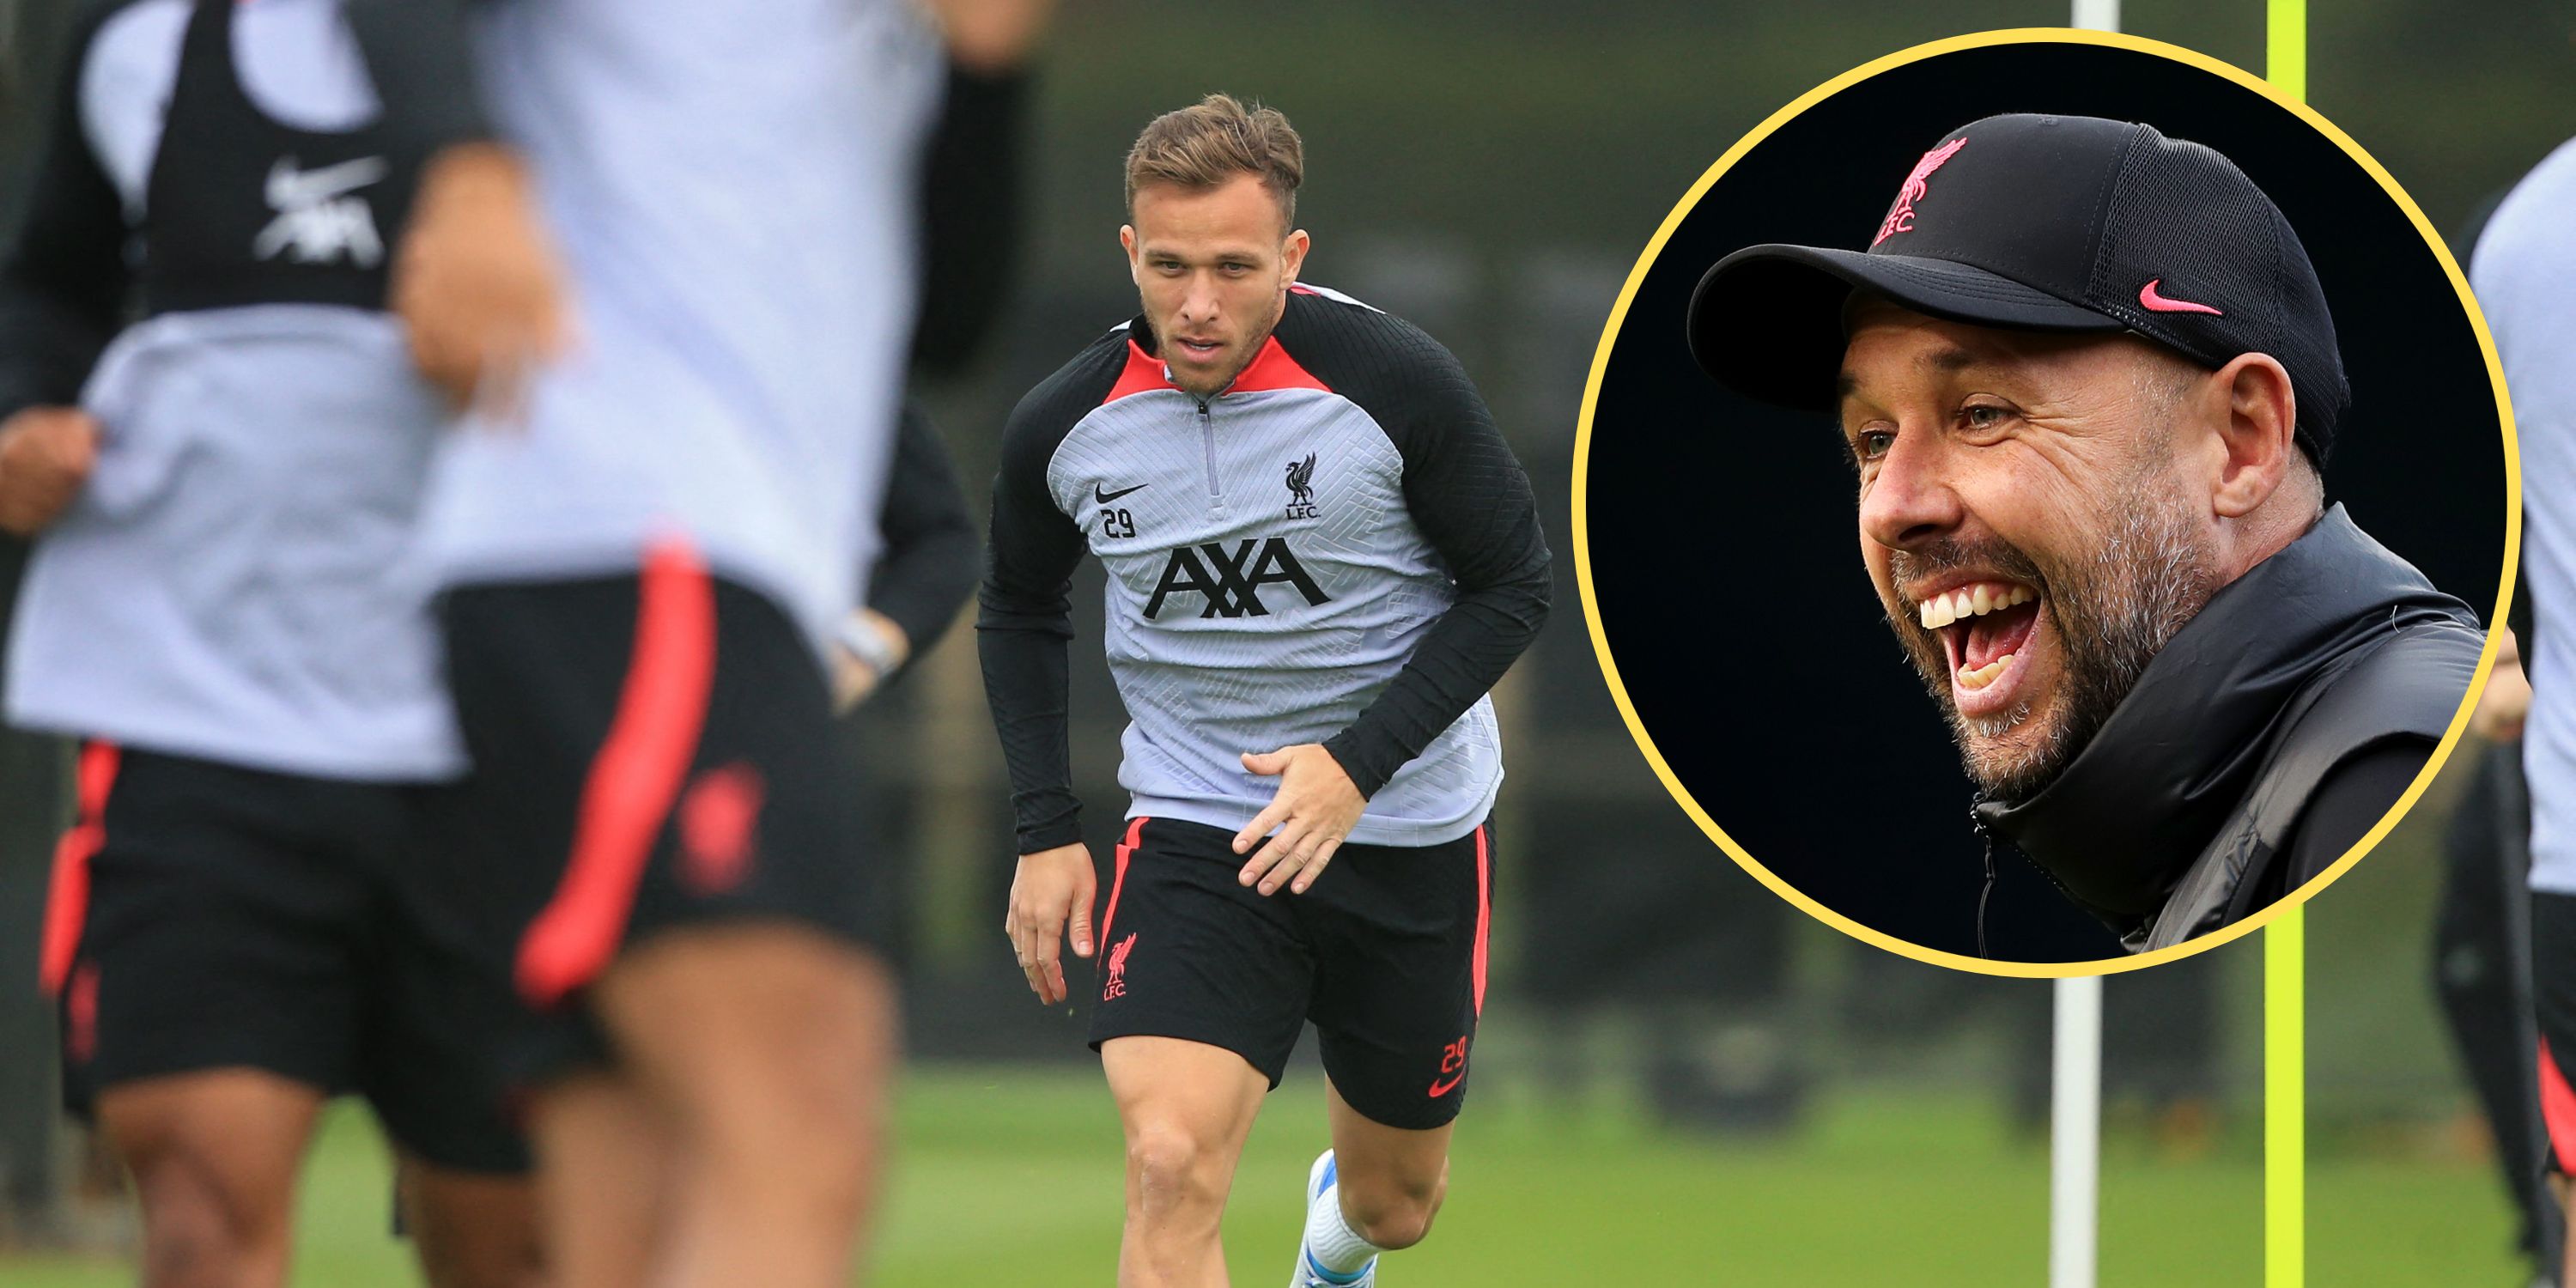 ‘You can tell’ – Liverpool coach makes Arthur Melo claim after watching him in training